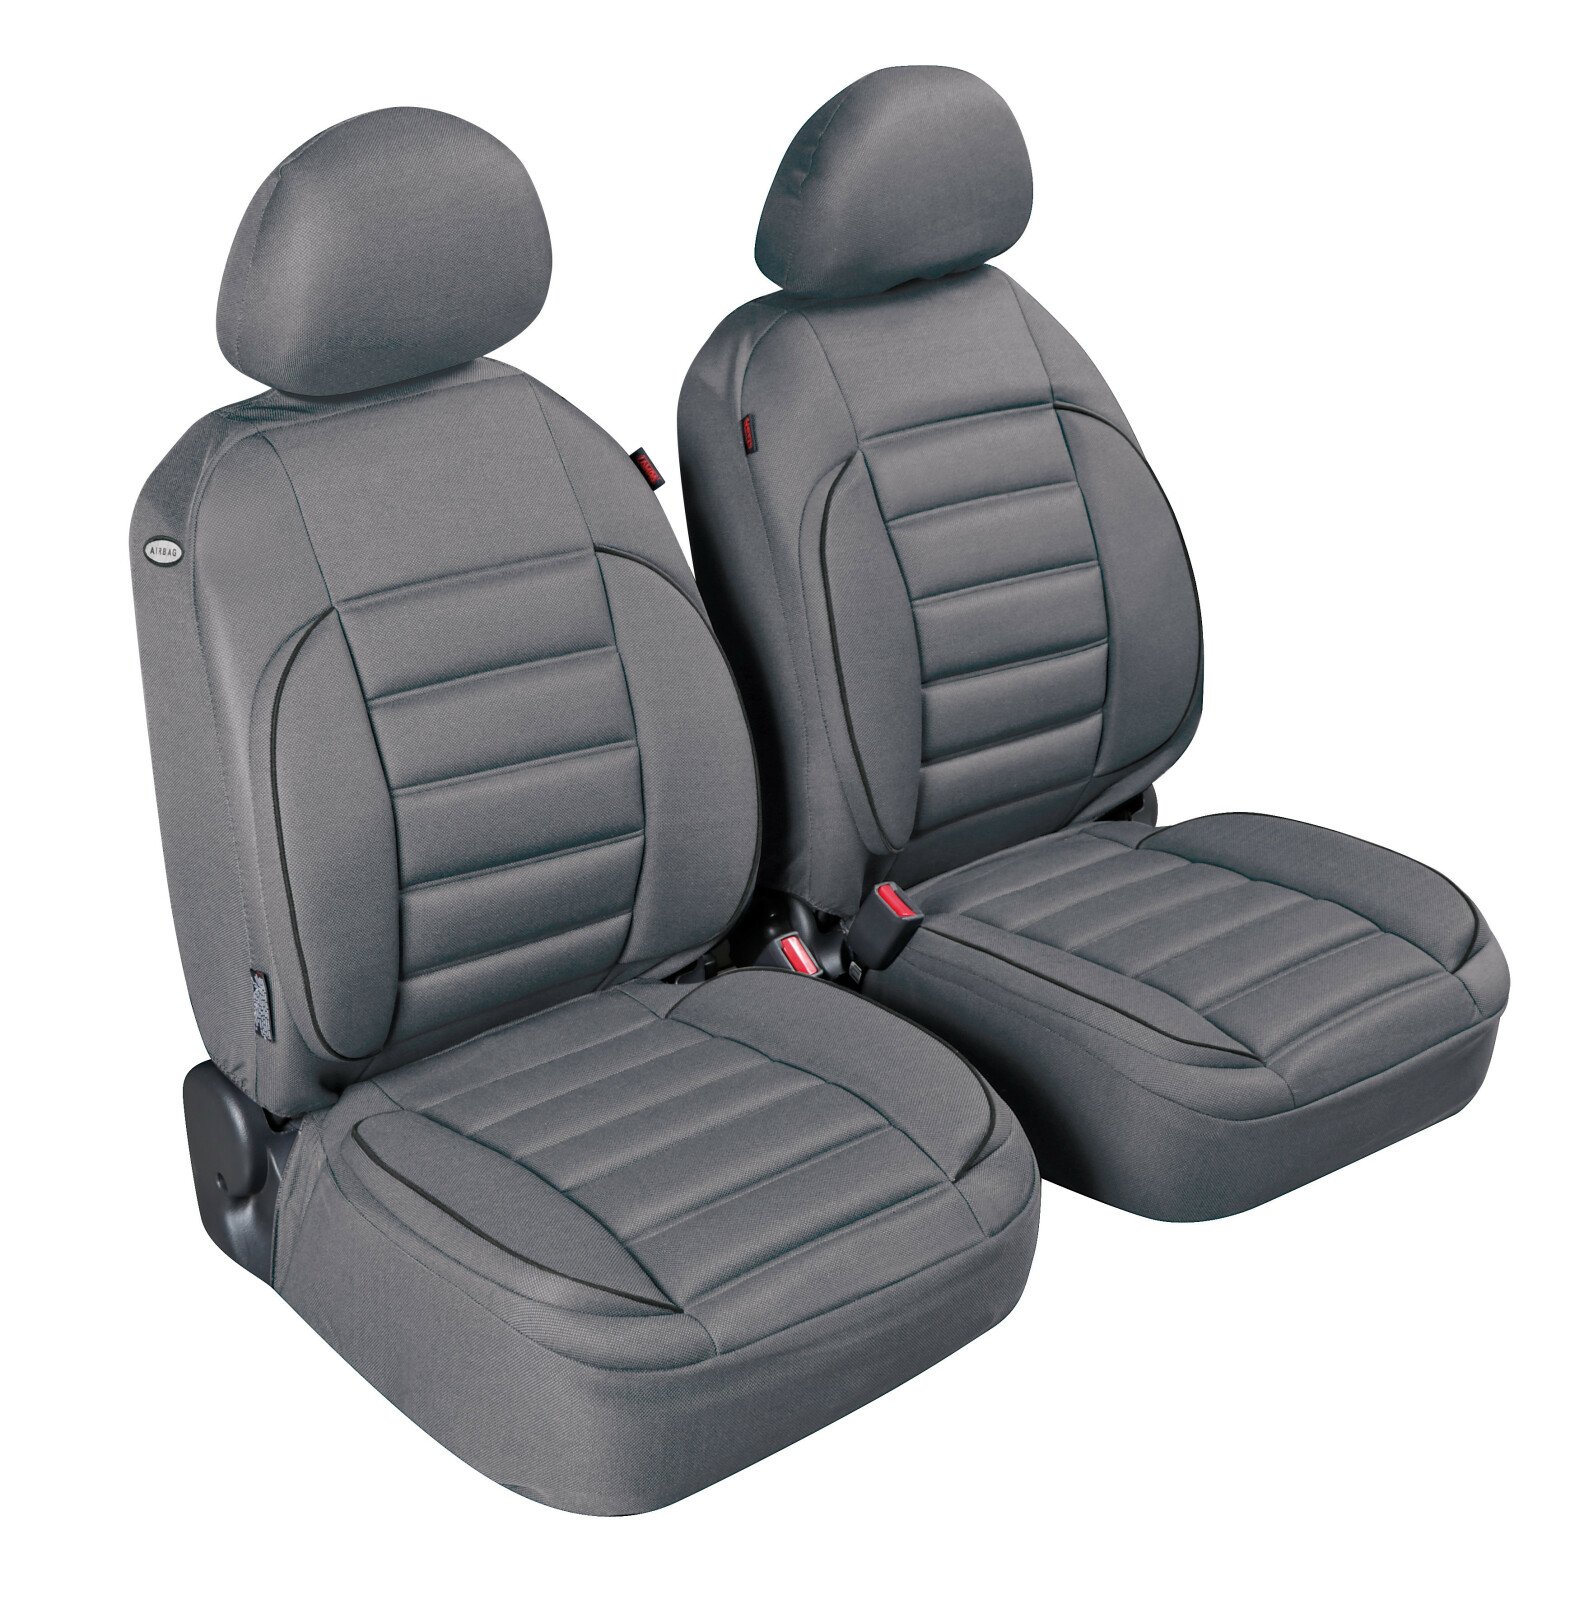 De-Luxe Sport Edition, high-quality front seat covers - Grey thumb